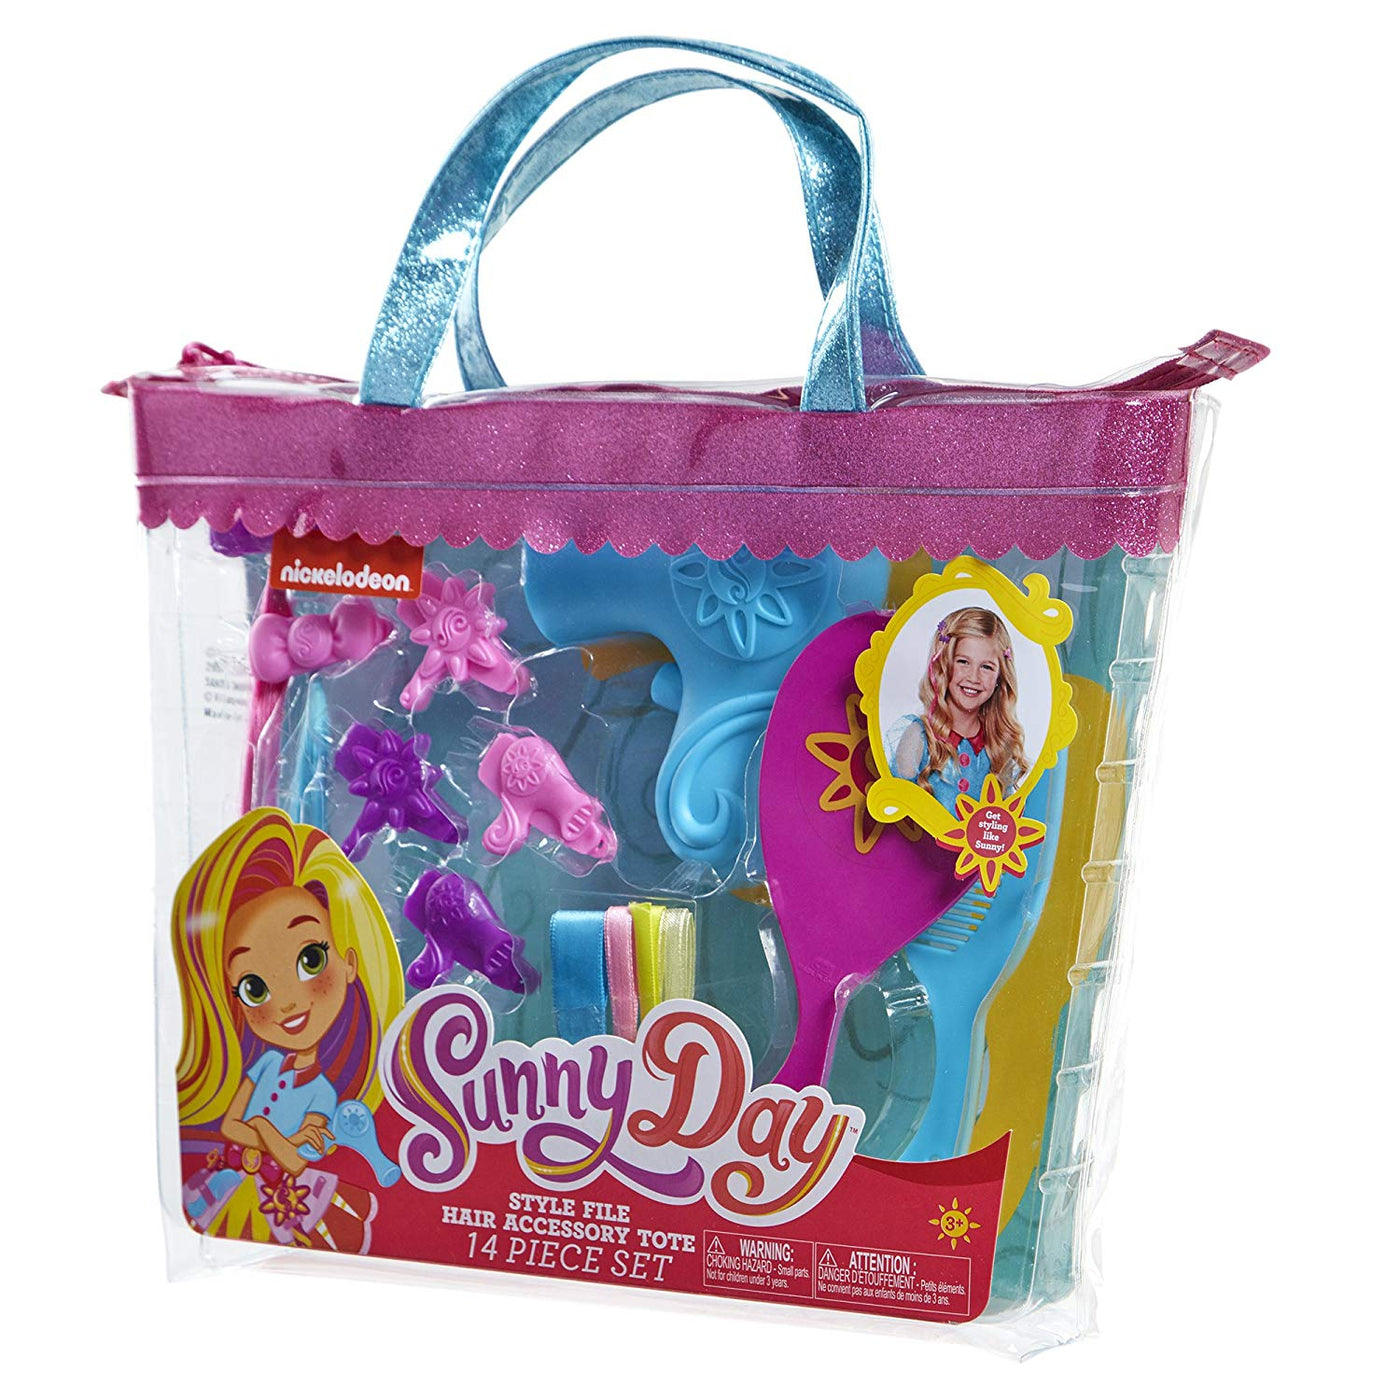 Sunny Day Style File Hair Accessory Tote